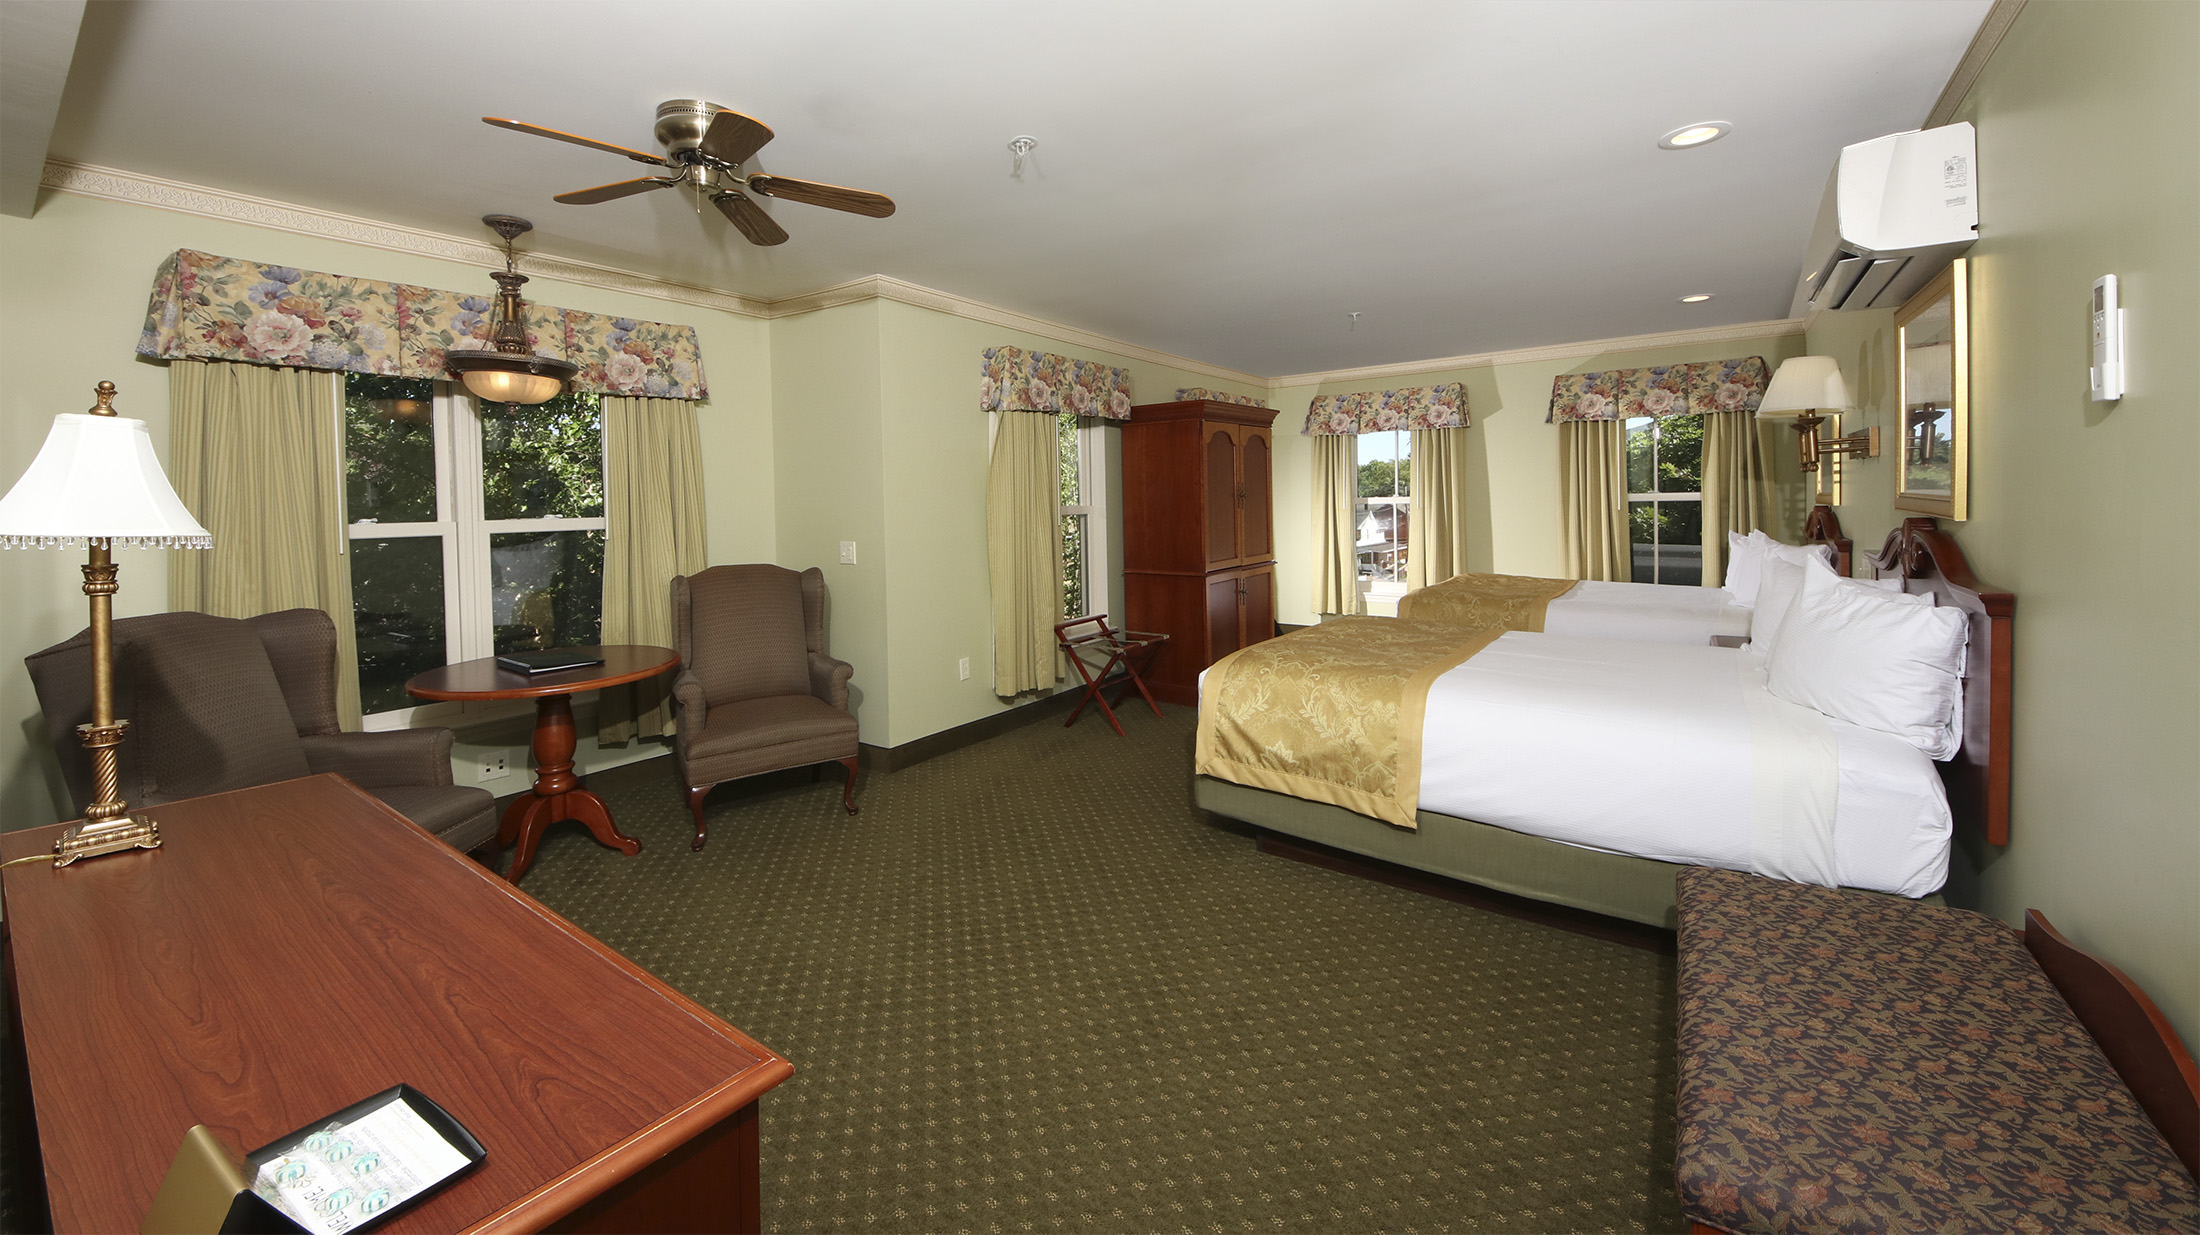 Photo of Two Room Suite at the Bar Harbor Grand Hotel in Bar Harbor Maine